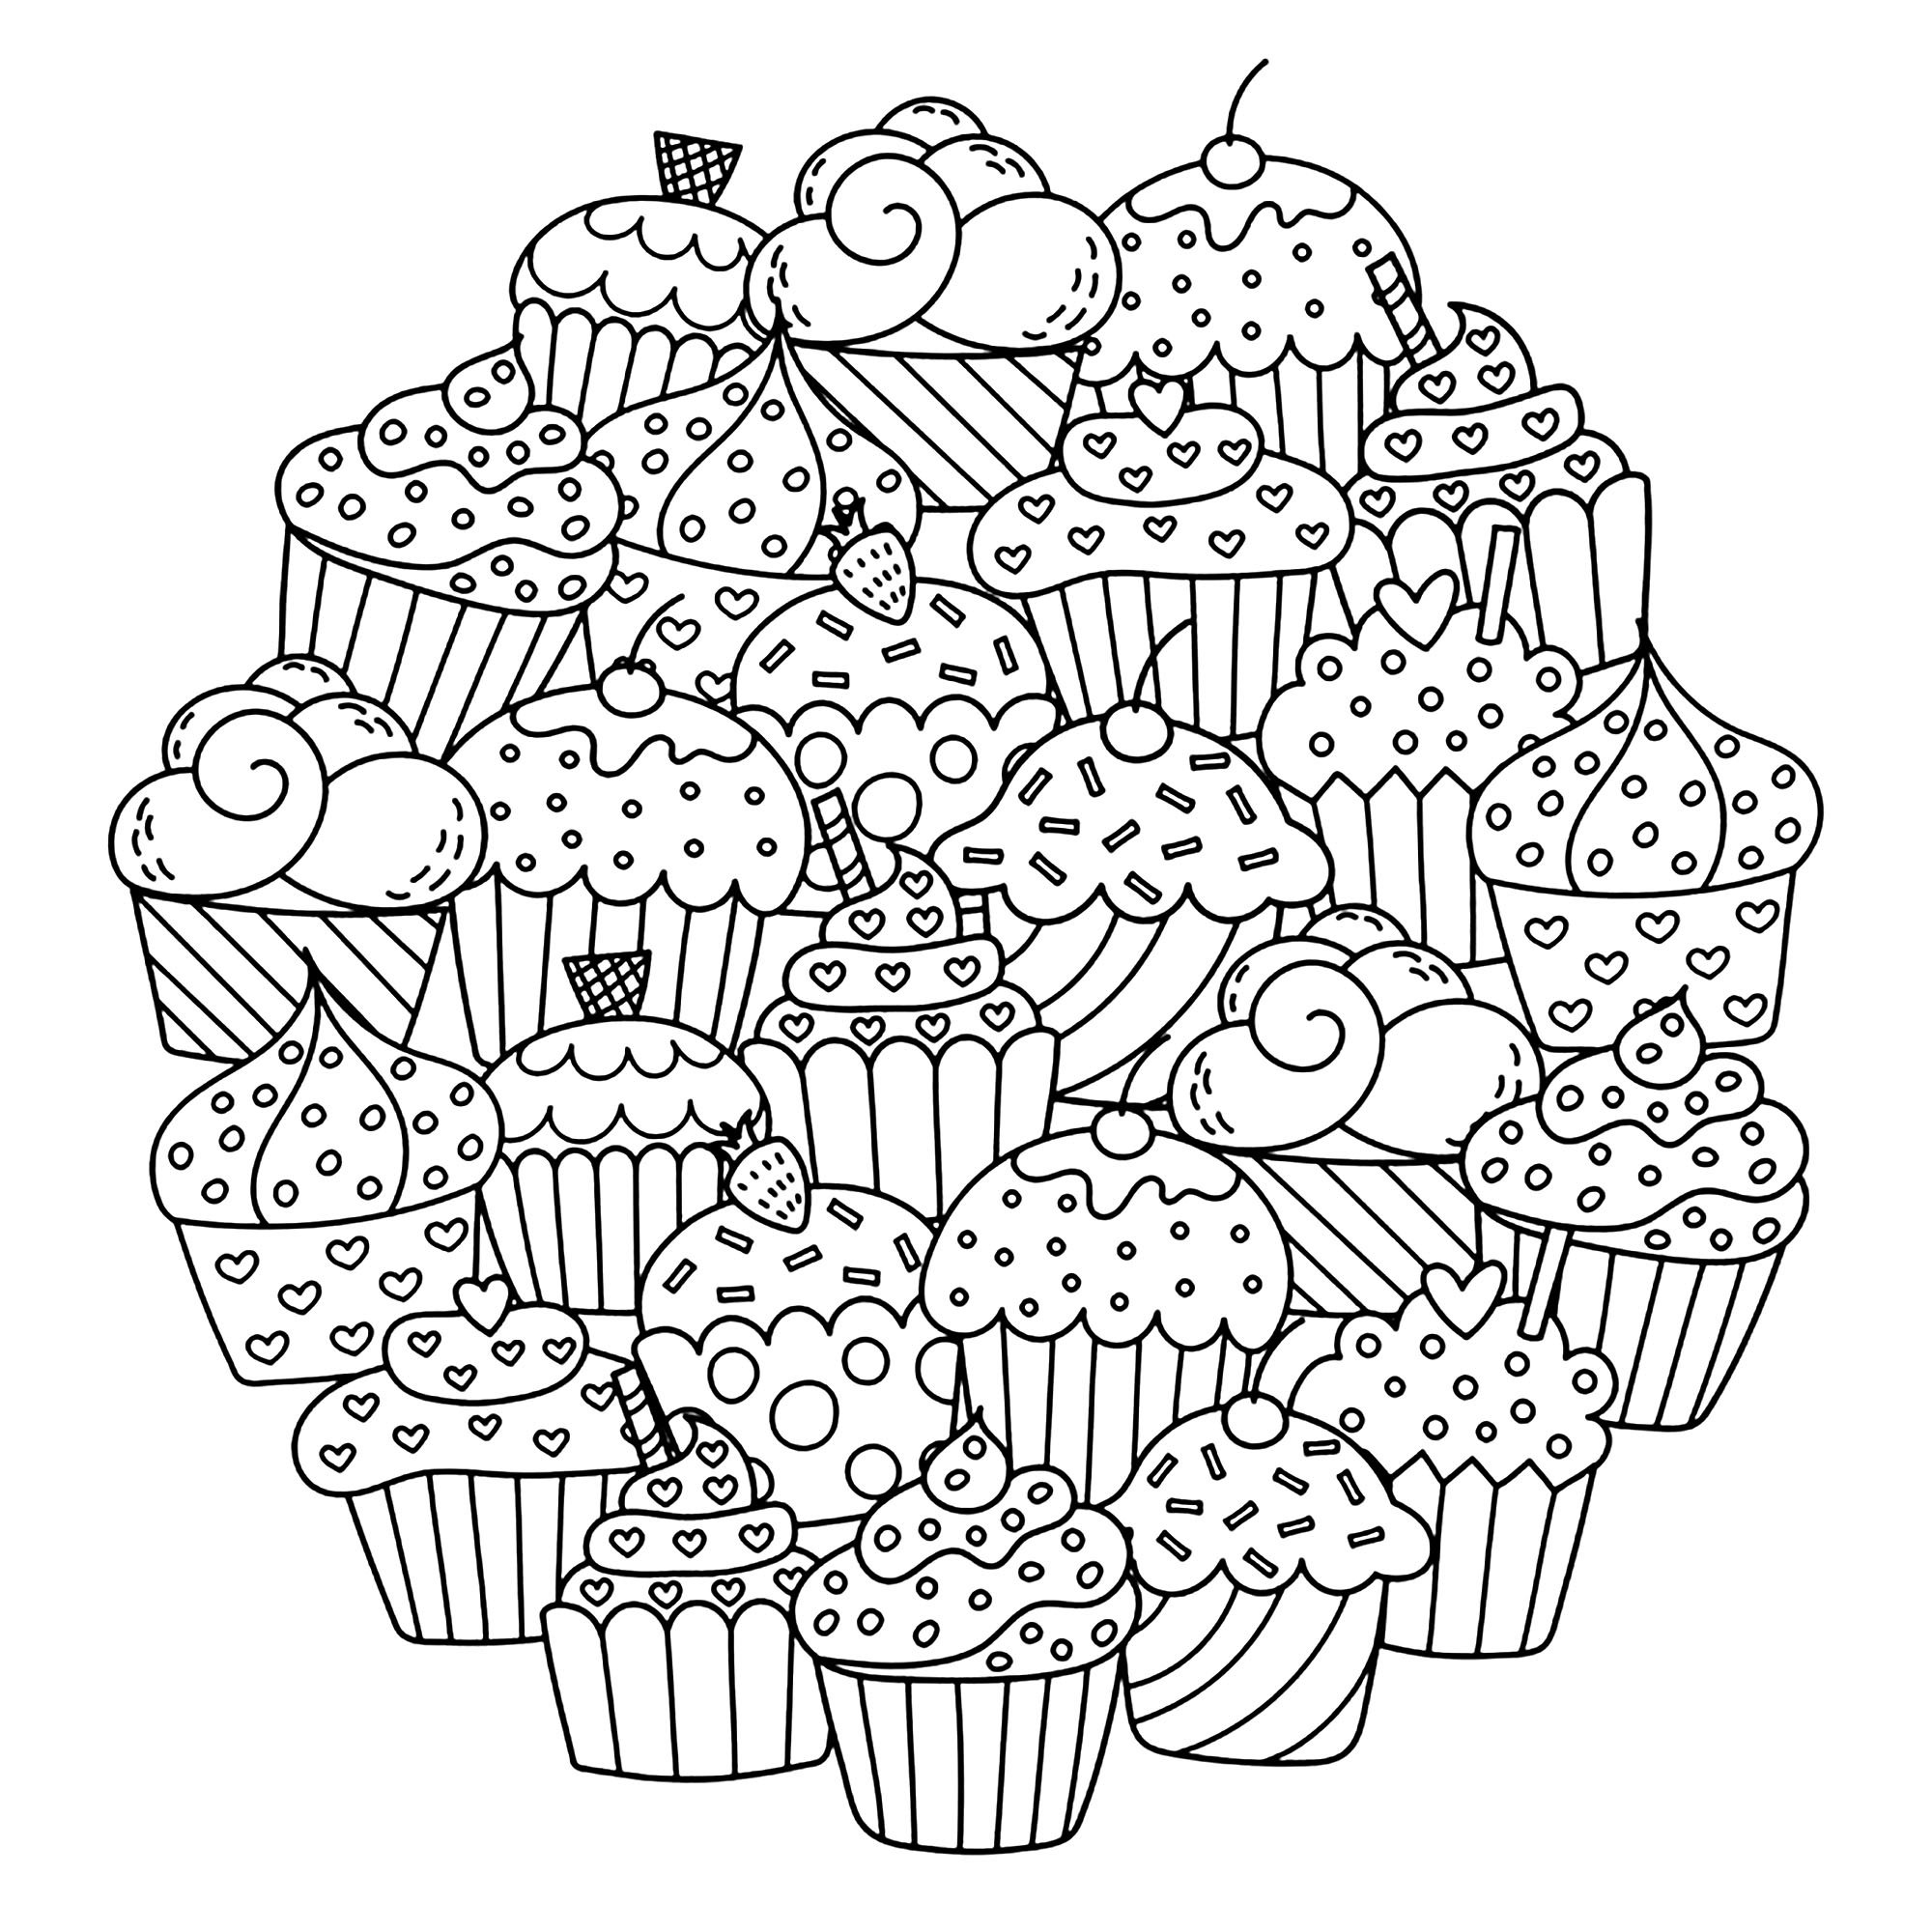 Circle cupcakes - Cupcakes Adult Coloring Pages